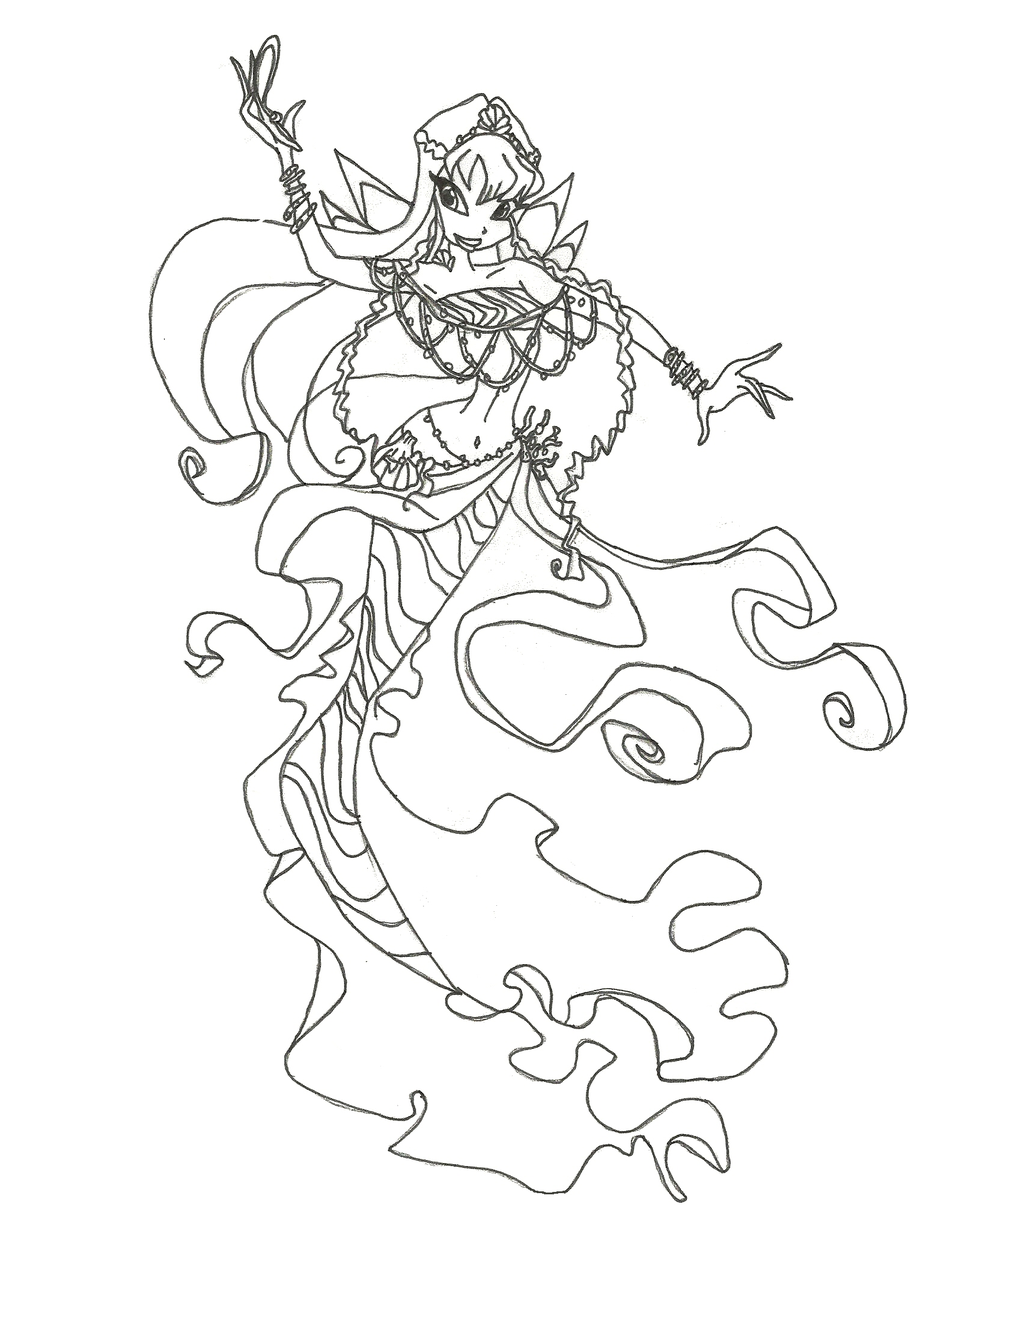 Winx Mermaid coloring pages, to print and download for free